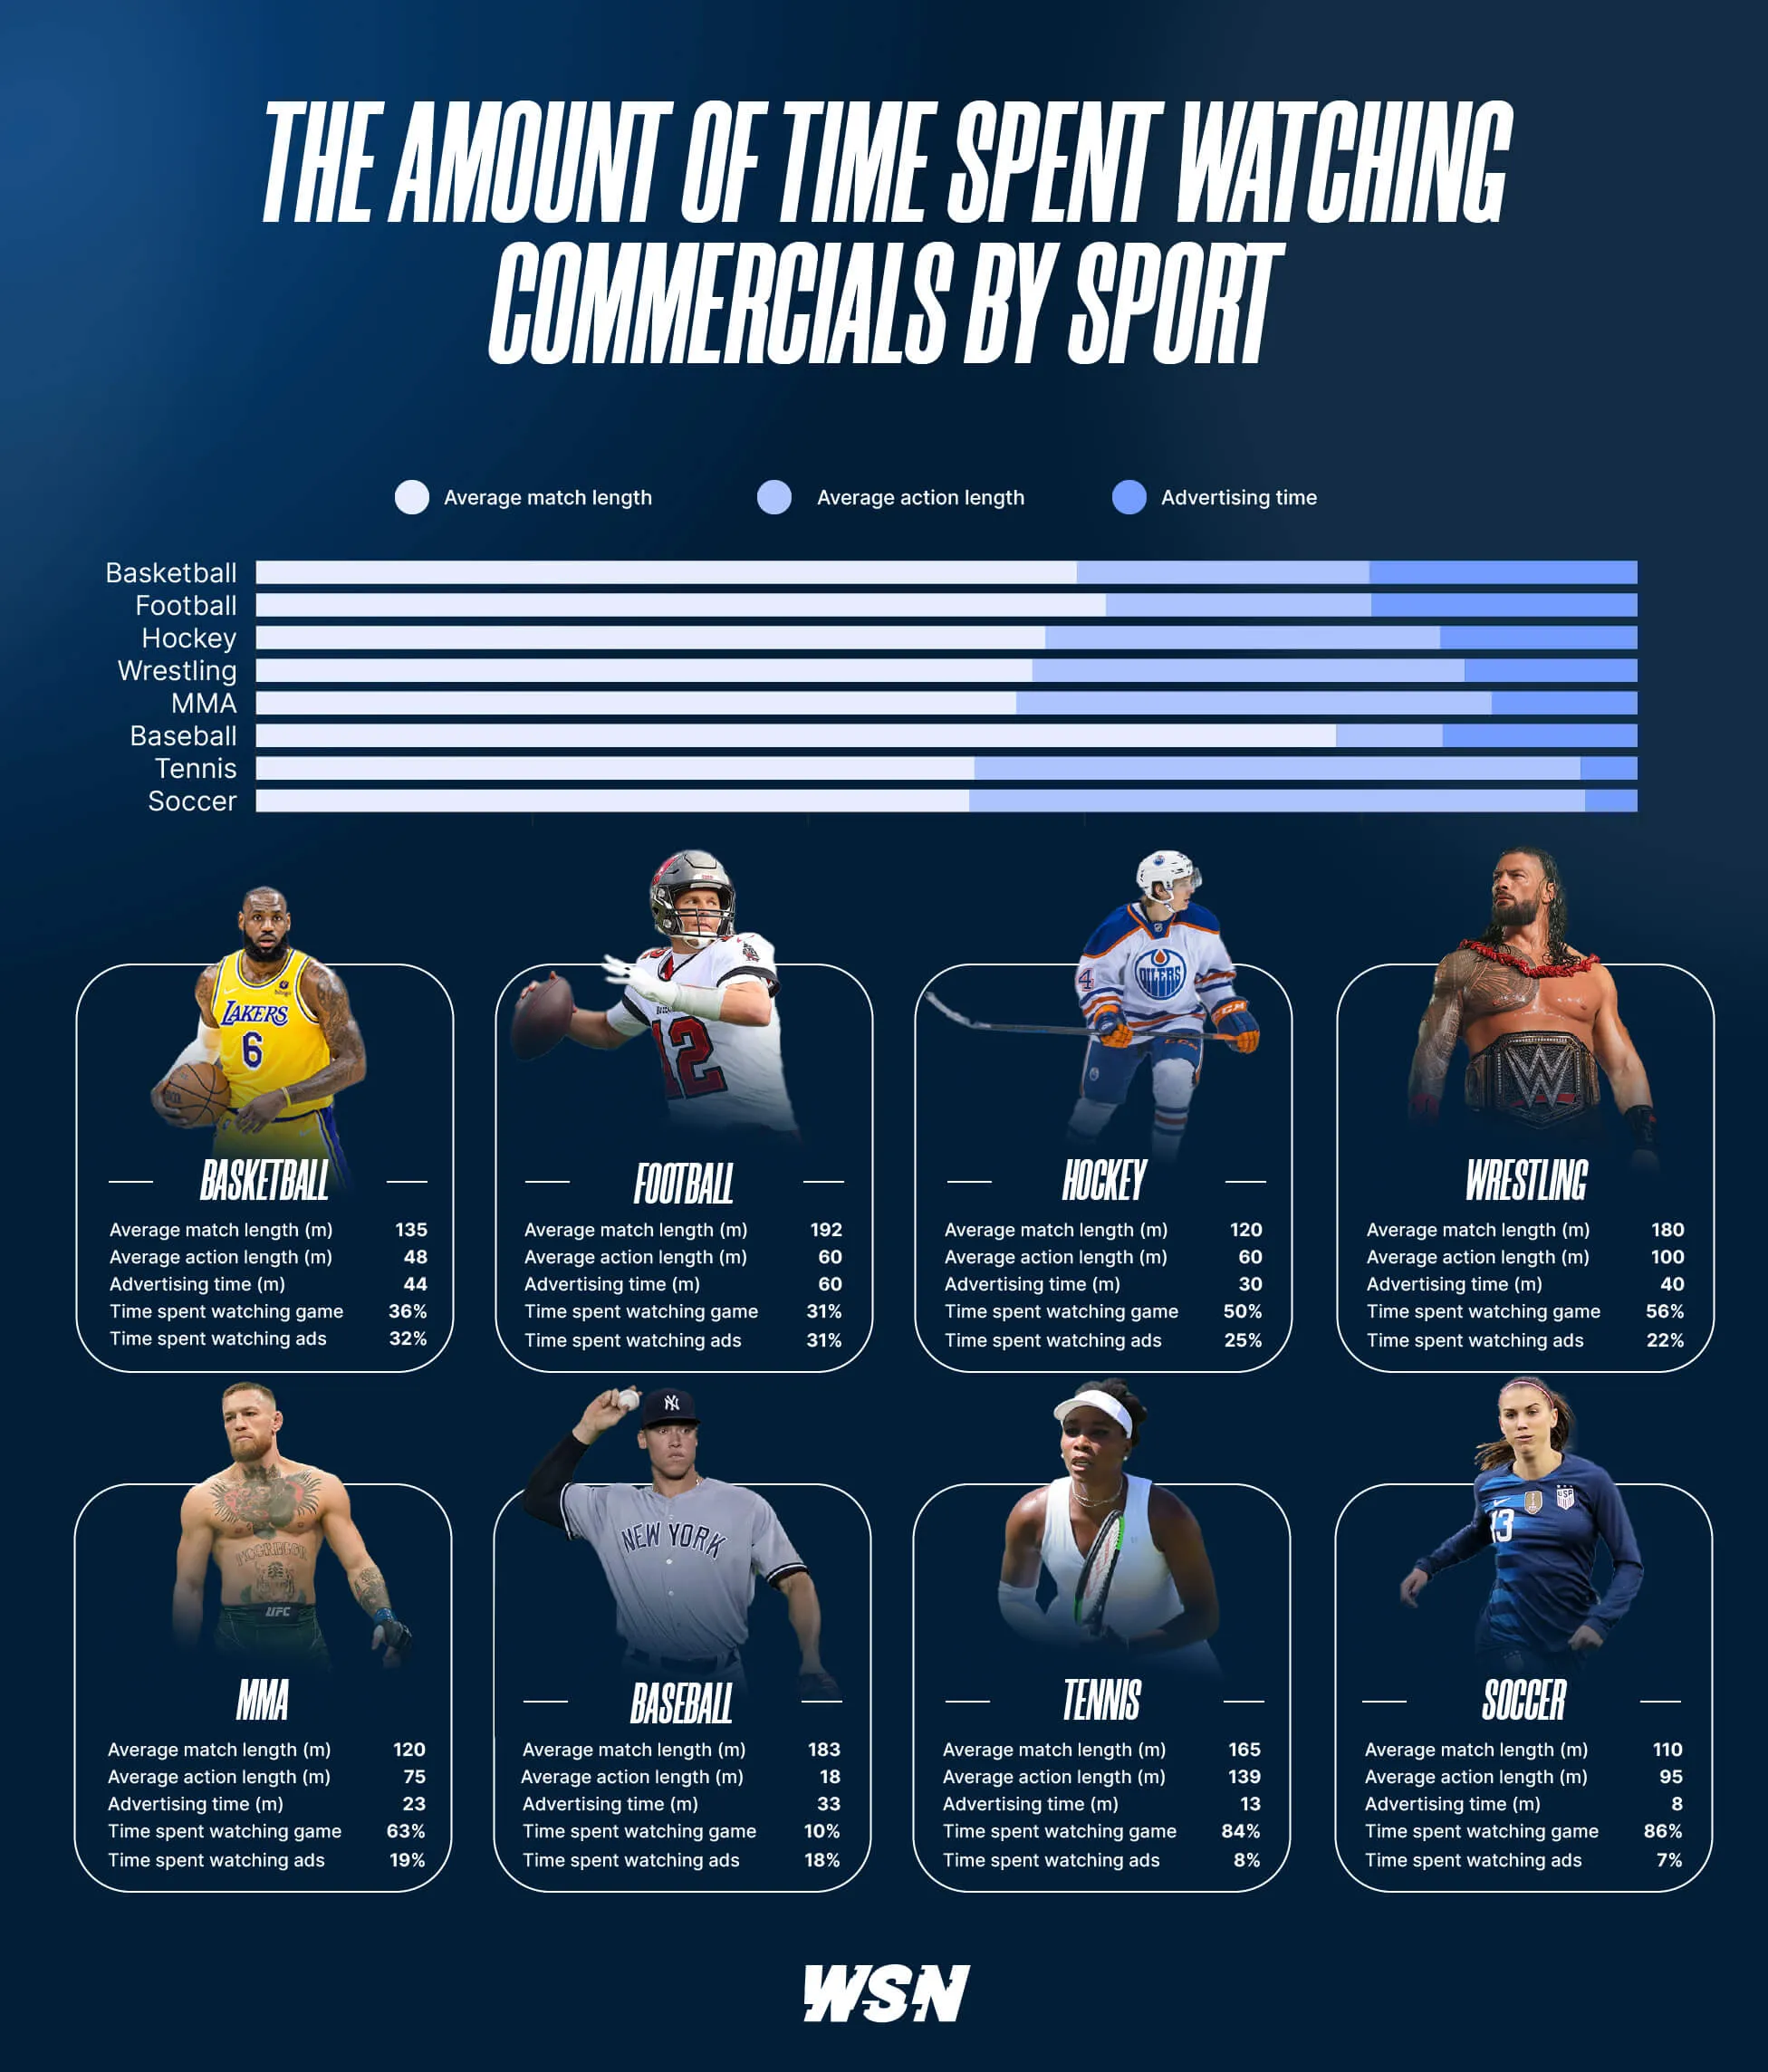 Comparing the time spent watching commercials for different sports